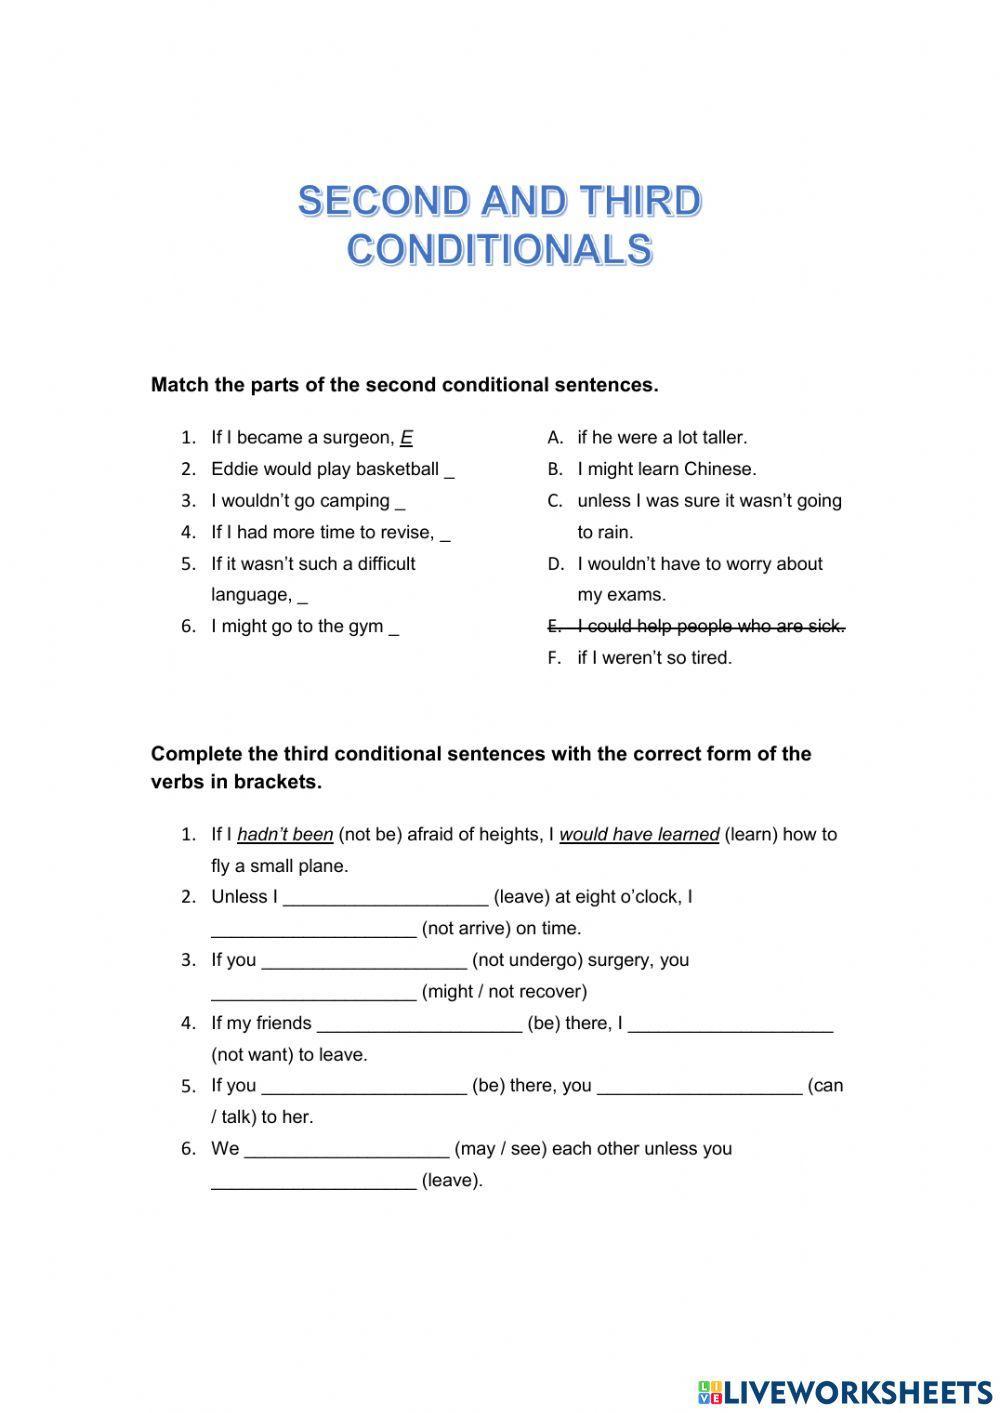 Second and Third Conditionals